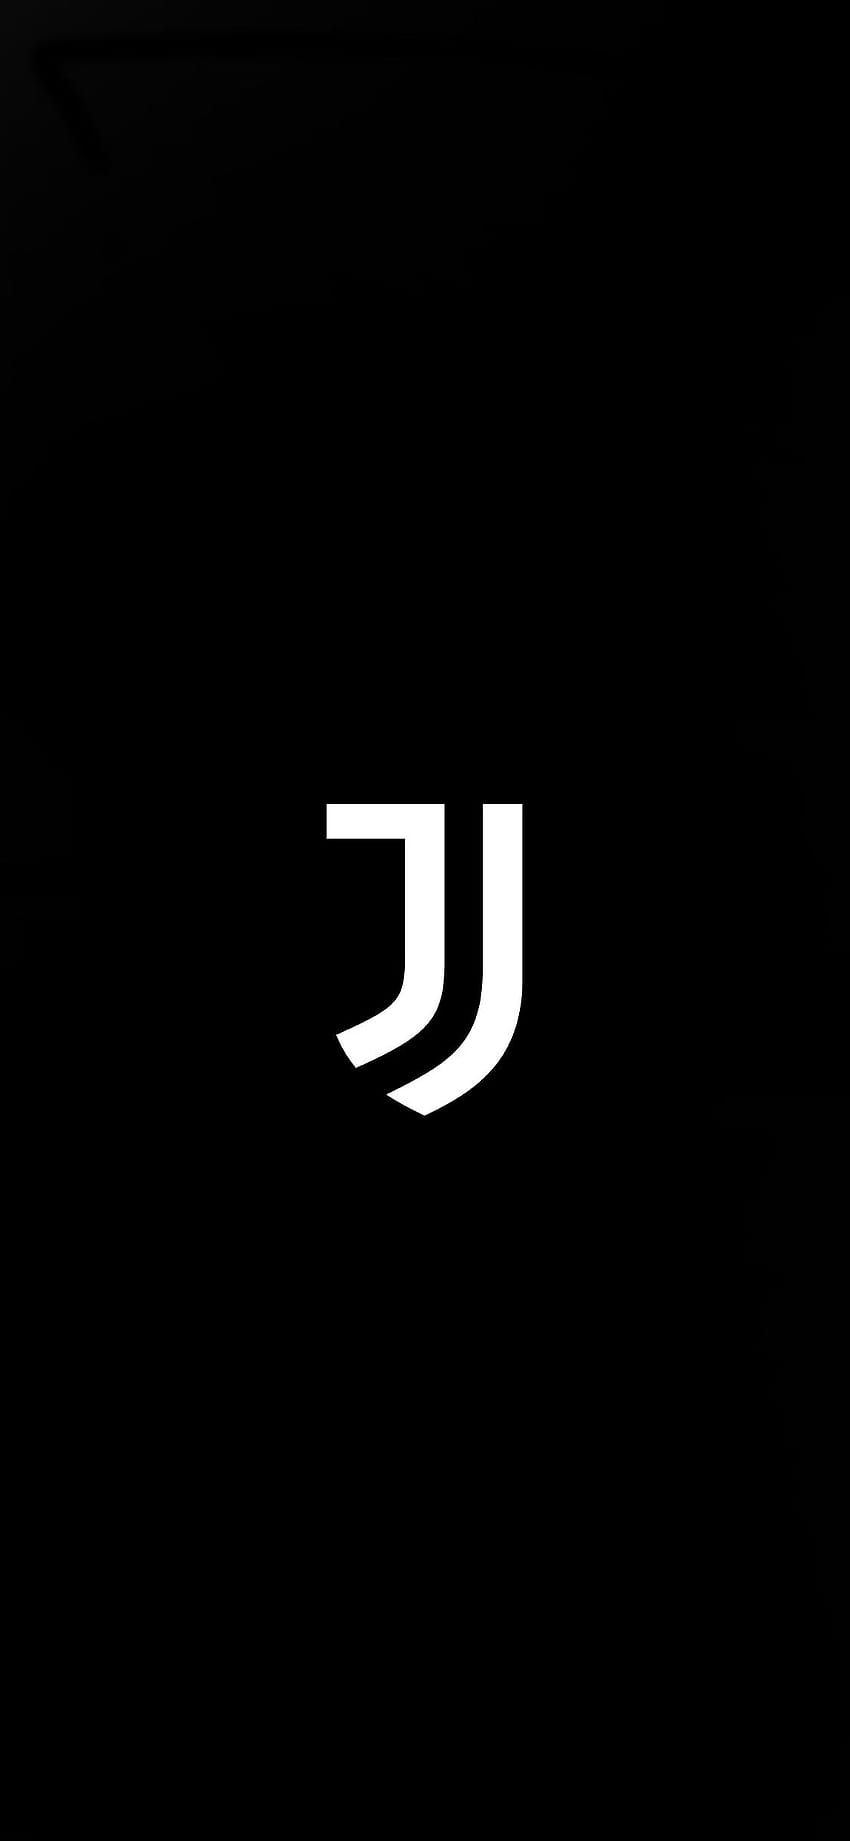 Created a very minimalist iPhone X for those interested : Juve, juventus iphone x HD phone wallpaper